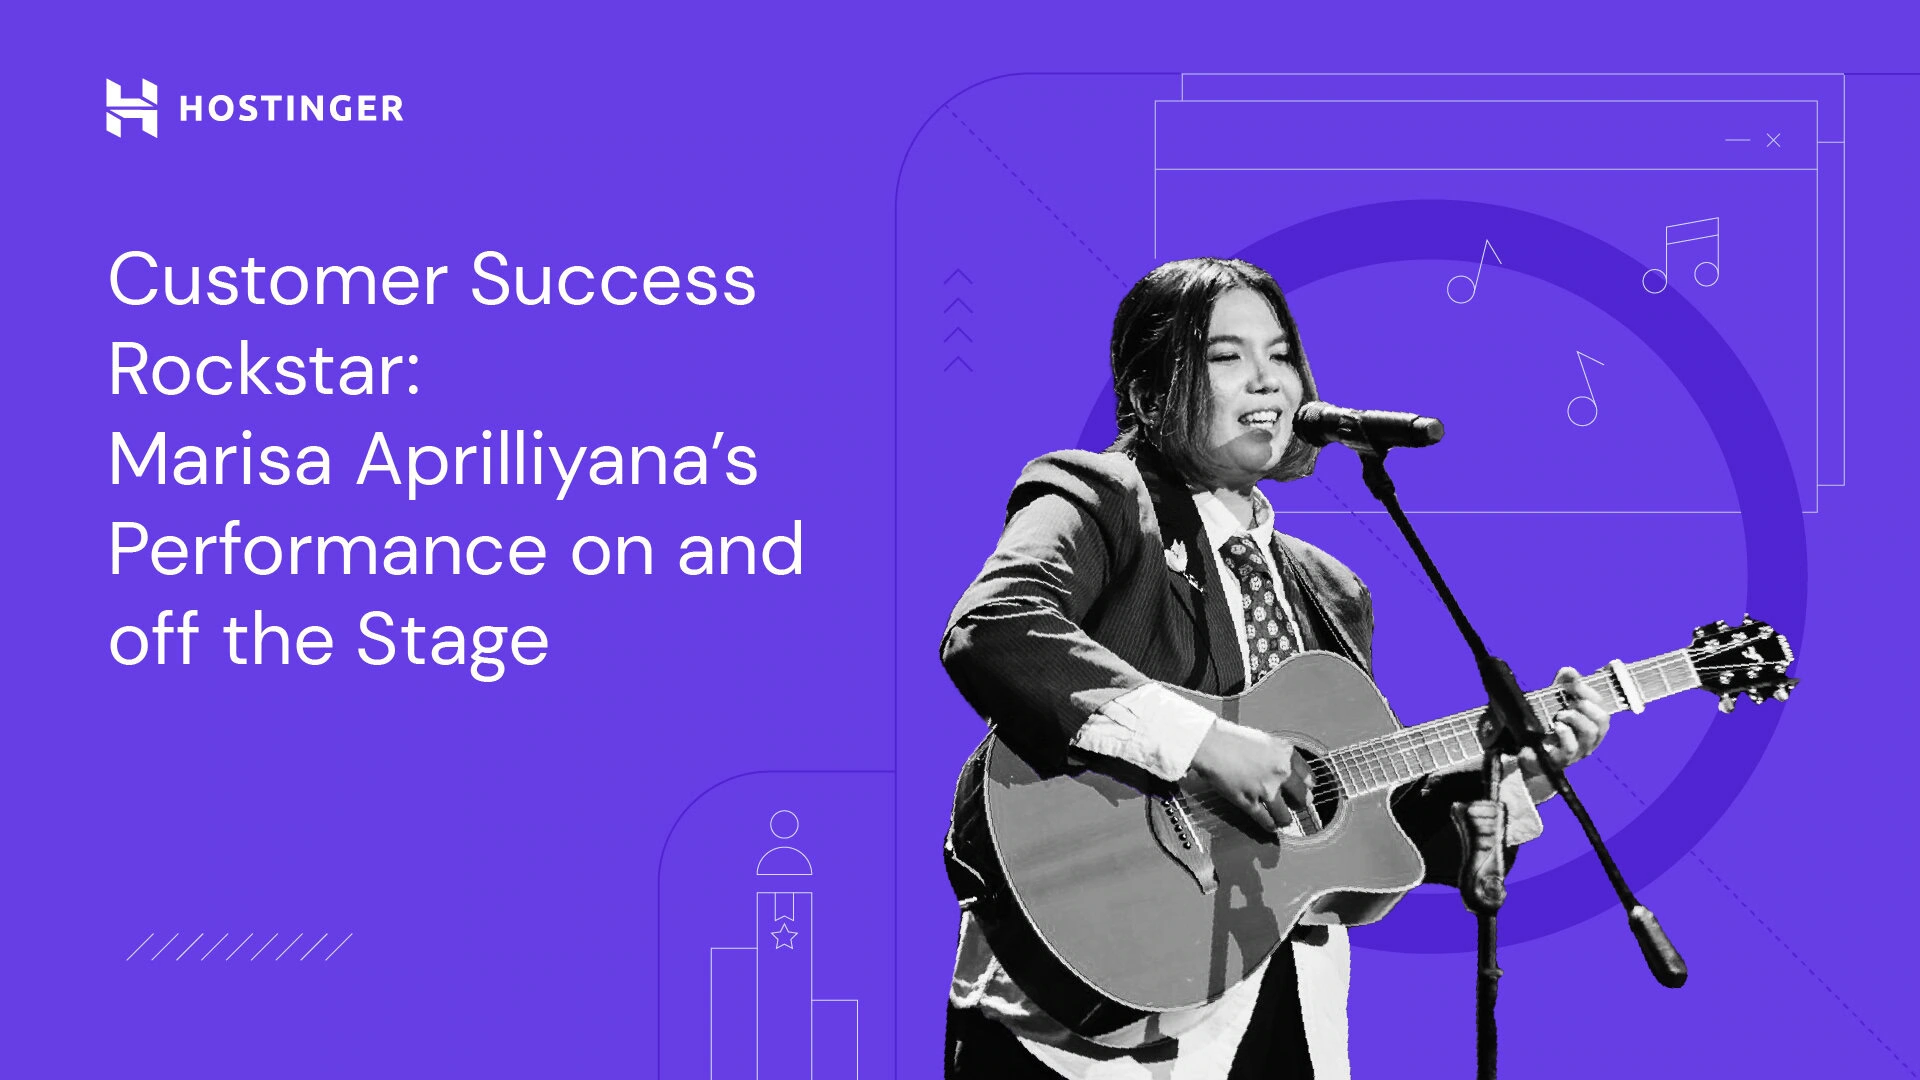 Customer Success Rockstar: Marisa Aprilliyana’s Performance on and off the Stage